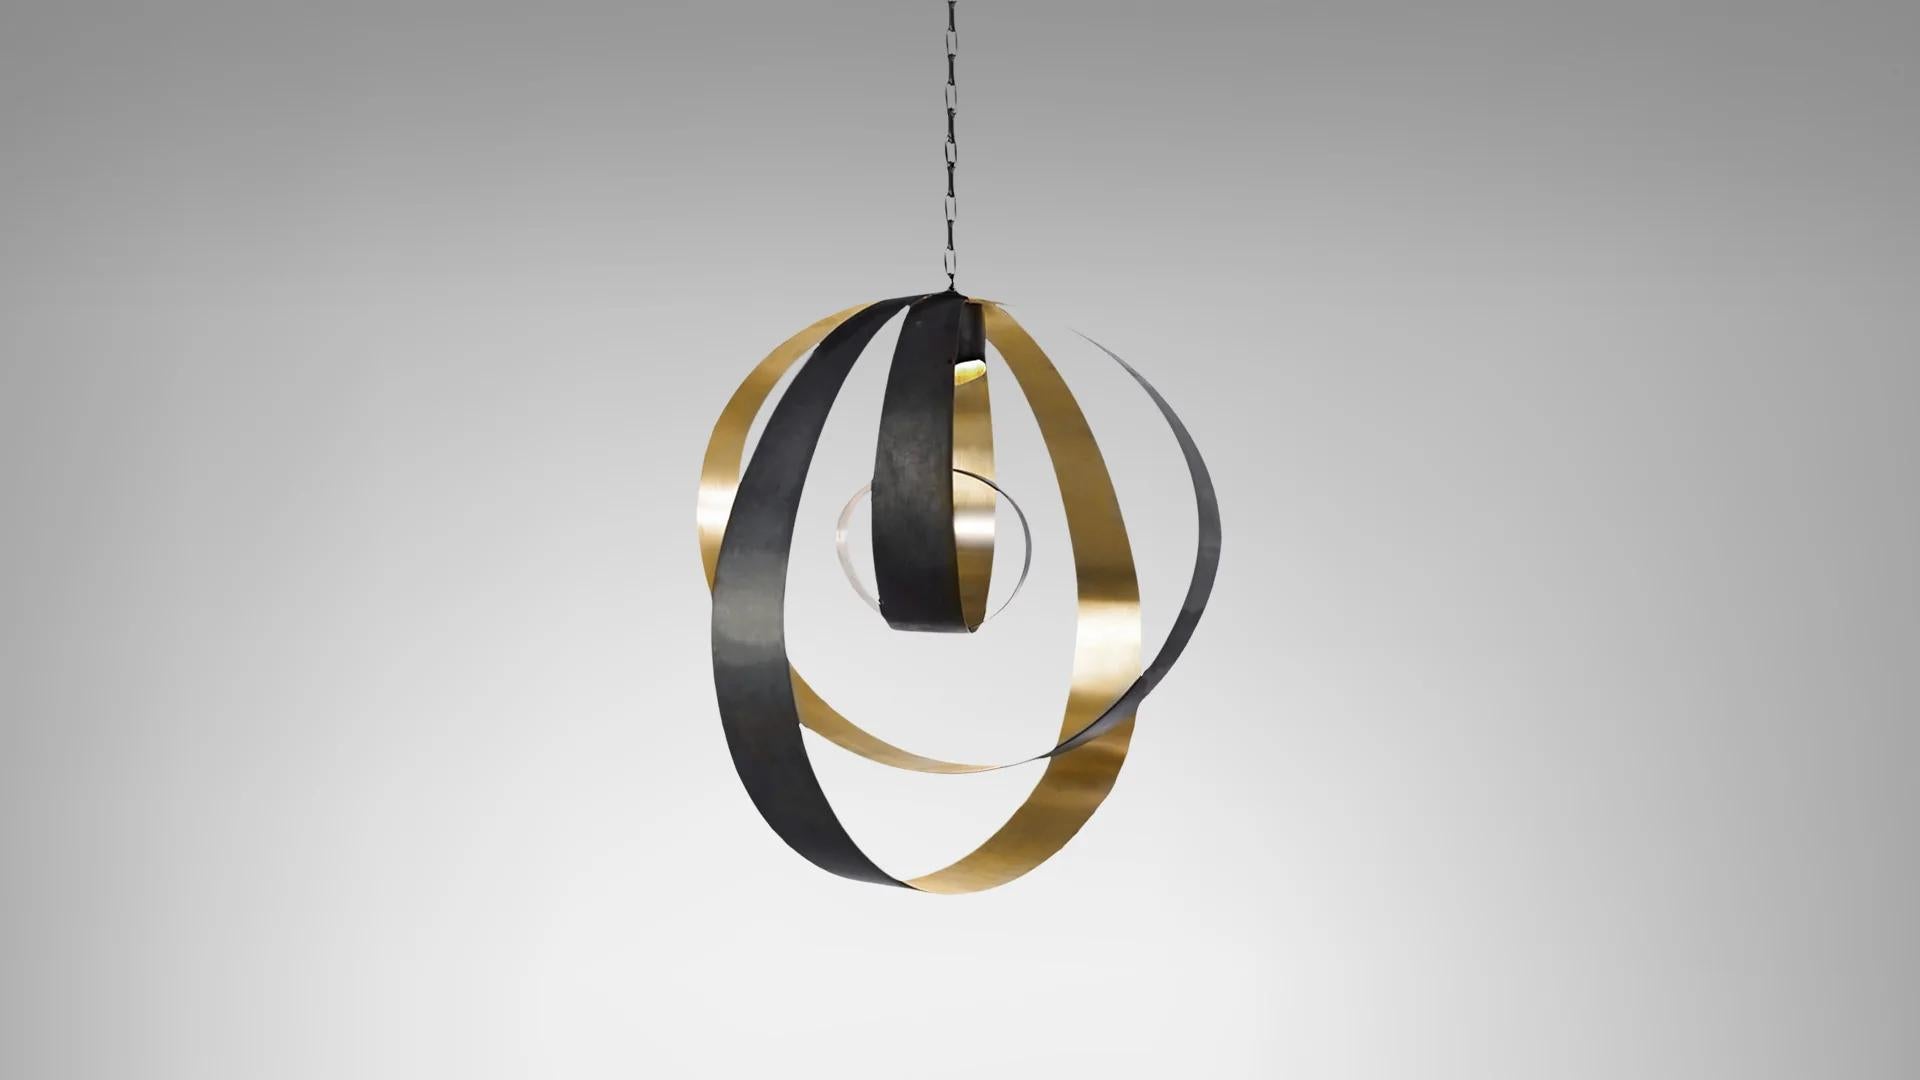 Lunar medium pendant by CTO lighting.
Materials: bronze with satin brass and bronze oval chain with black braided flex.
Dimensions: W 60 x D 40 x H 70 cm

All our lamps can be wired according to each country. If sold to the USA it will be wired